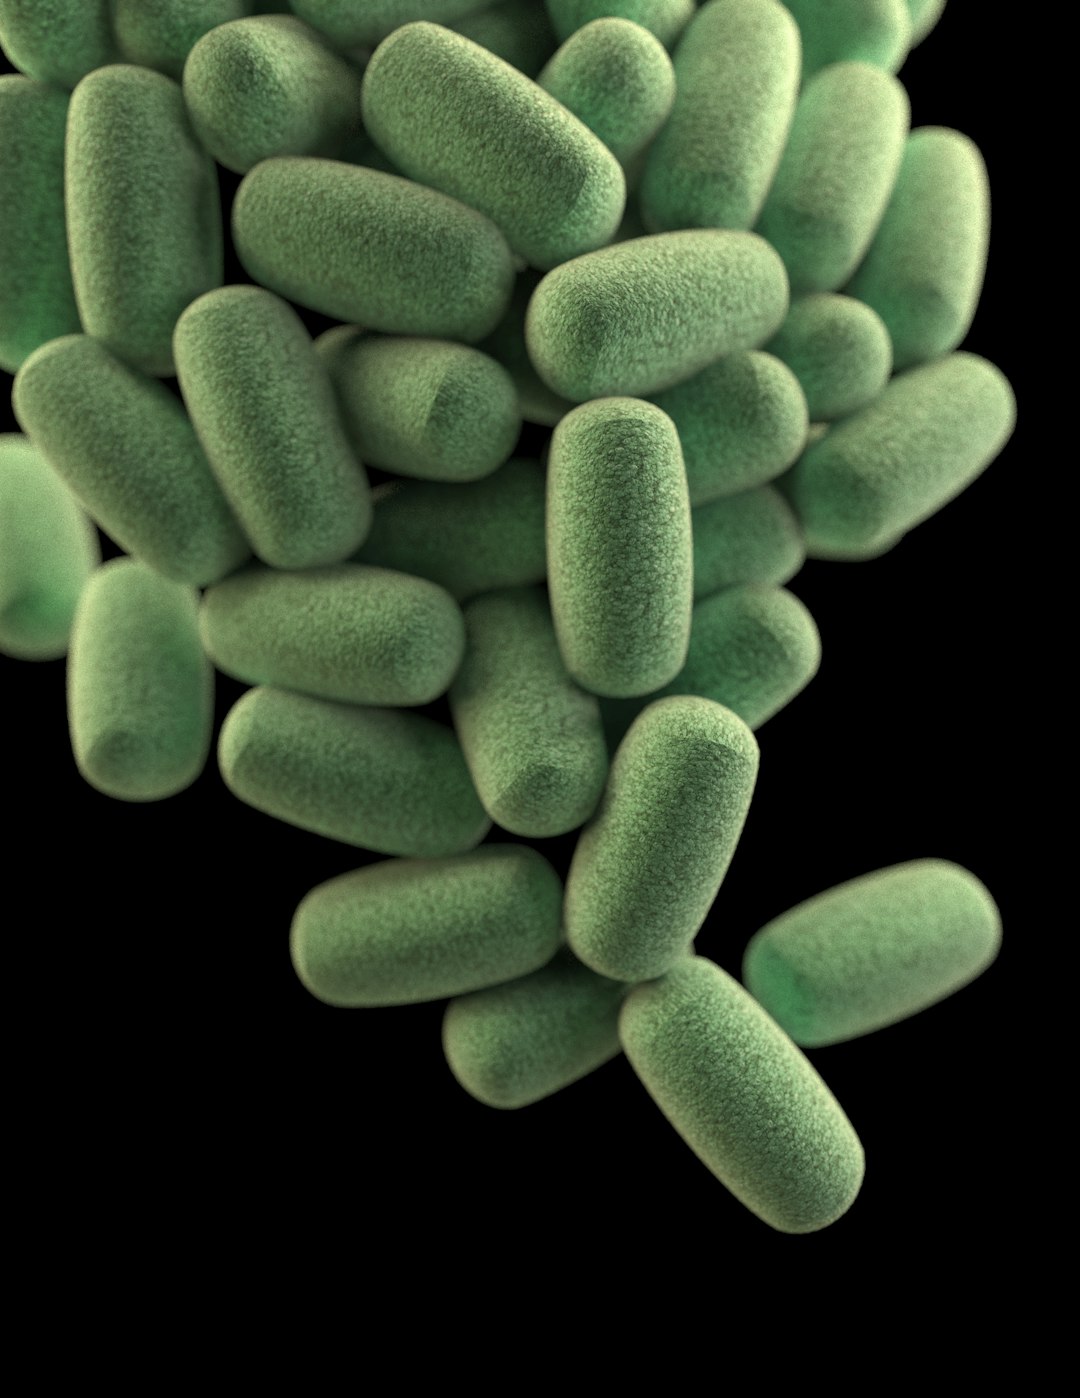 This illustration depicts a three-dimensional (3D), computer-generated image of a cluster of barrel-shaped, Clostridium perfringens bacteria. The artistic recreation was based upon scanning electron microscopic (SEM) imagery. See PHIL 21914, for another view of these microbes.